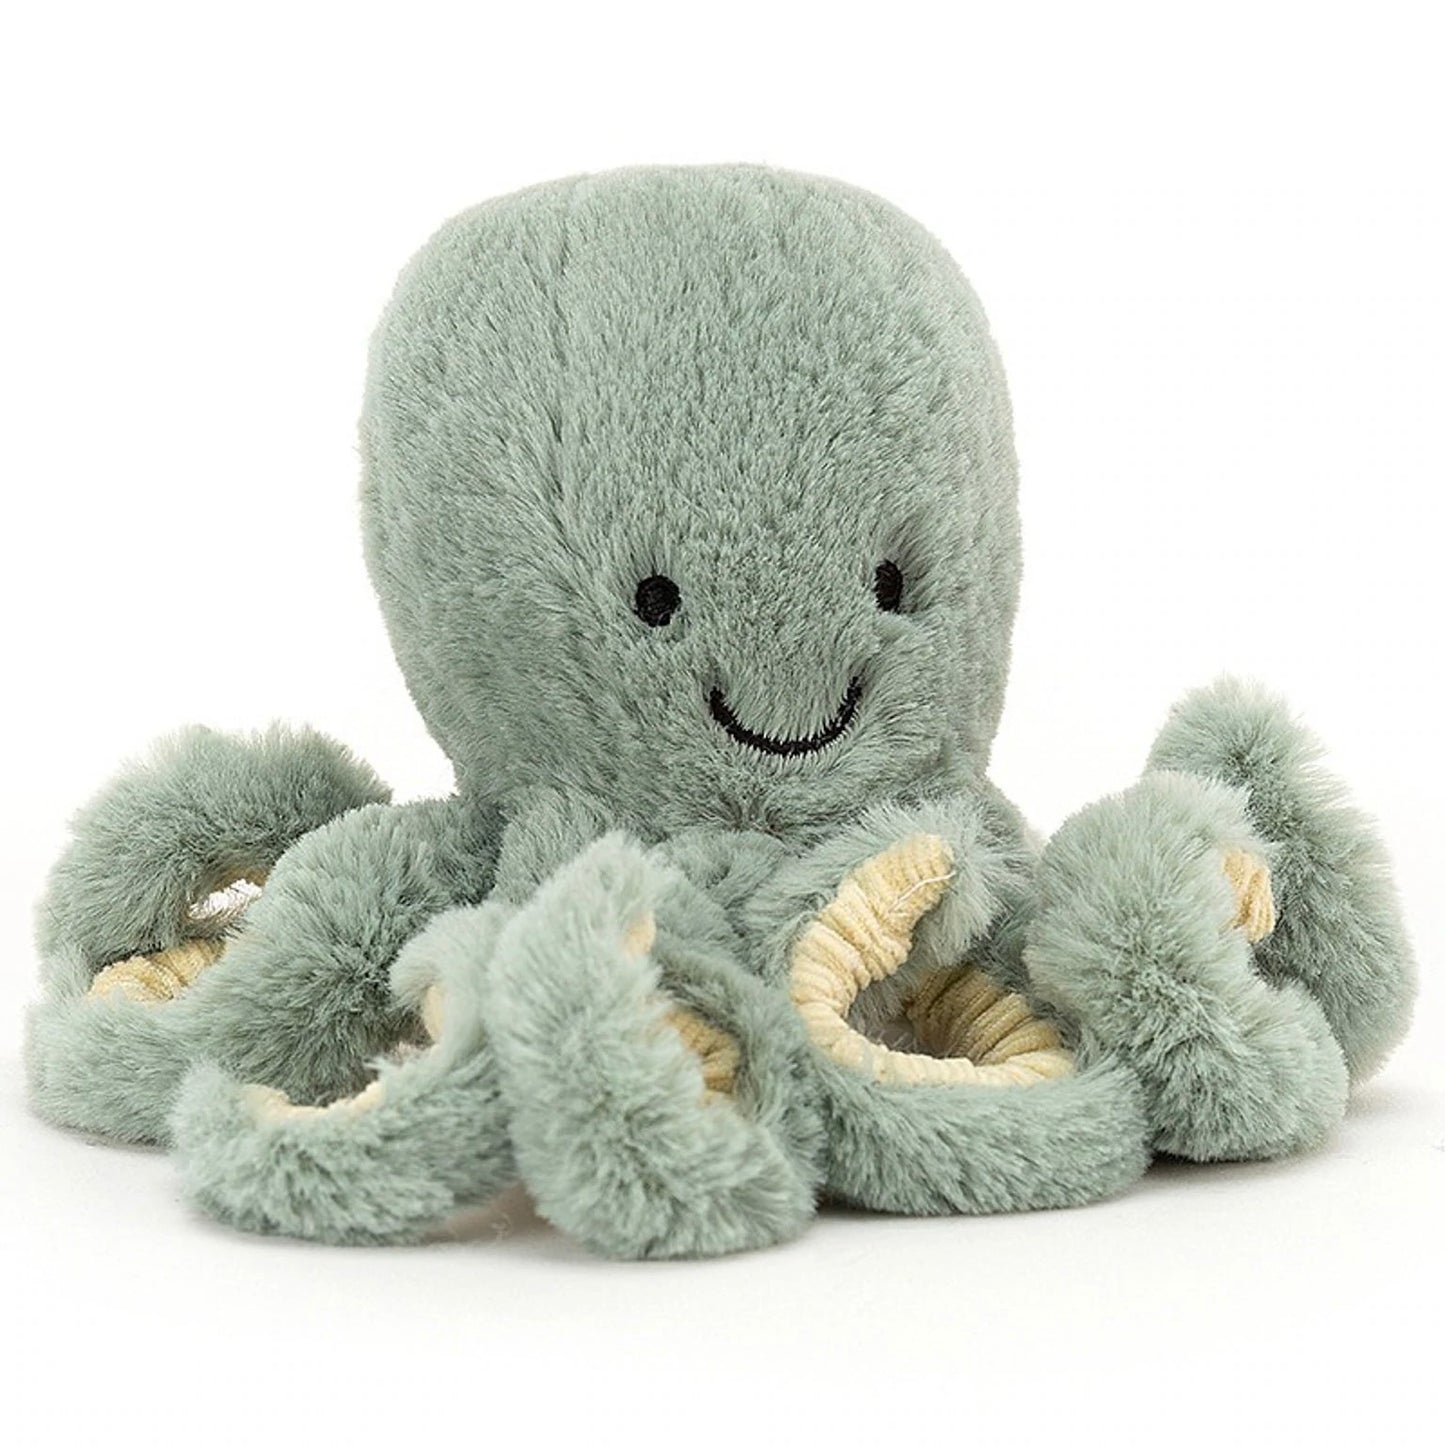 Odyssey Octopus Small by Jellycat